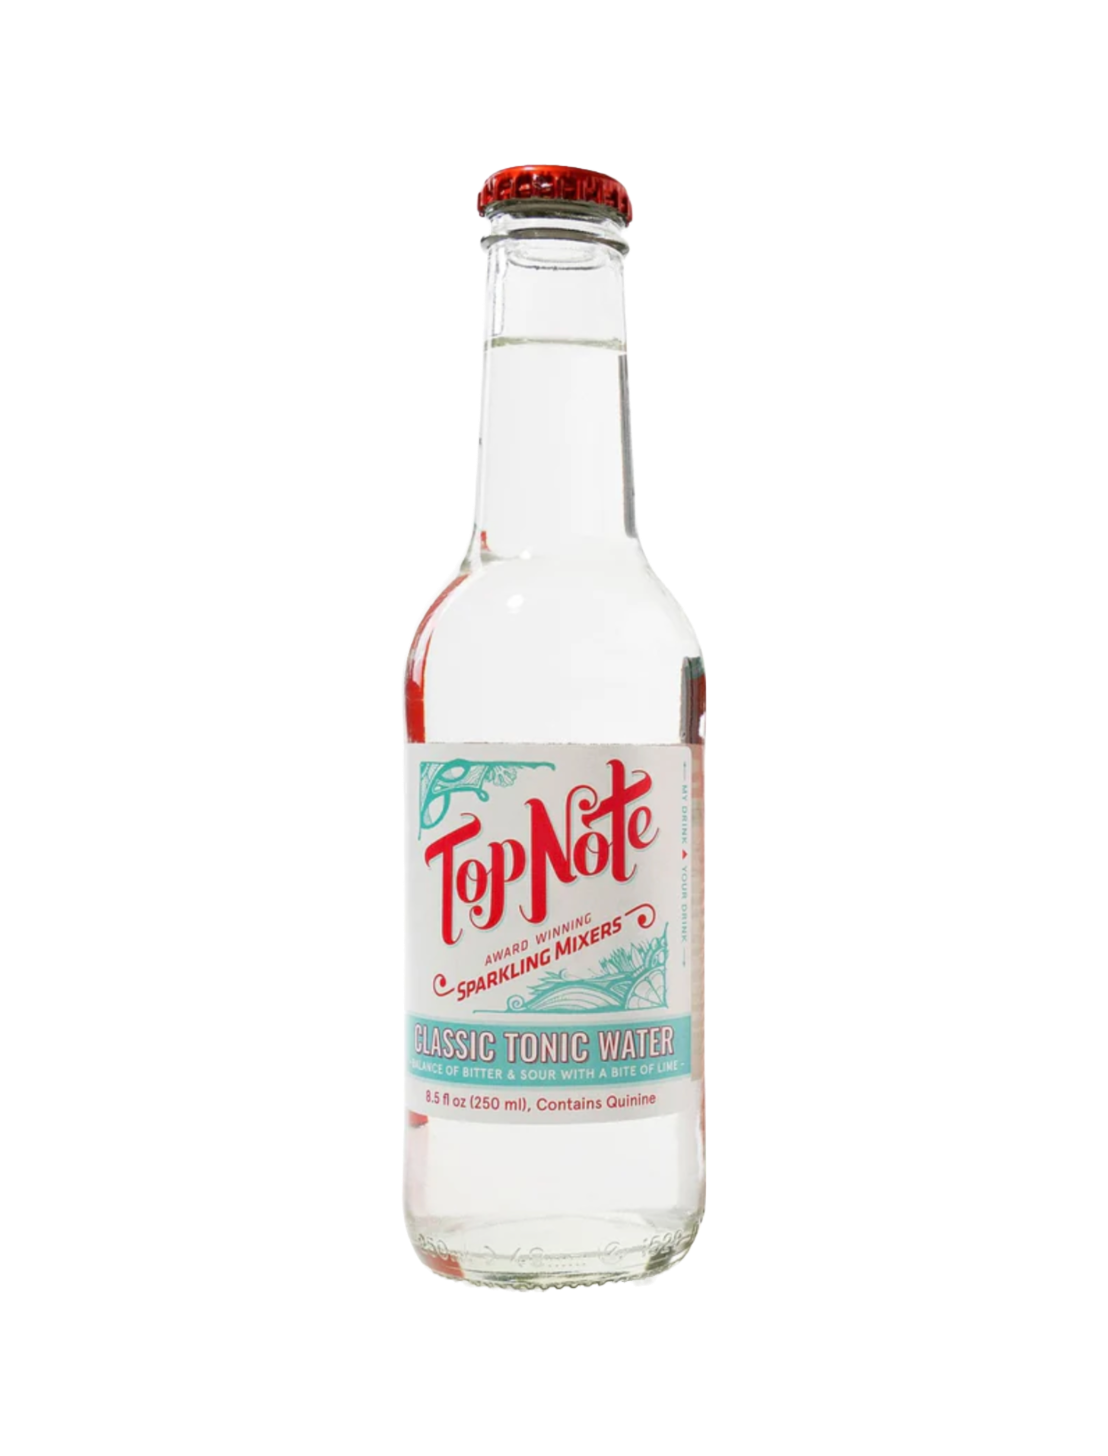 A bottle of top note tonic classic tonic water behind a plain white background